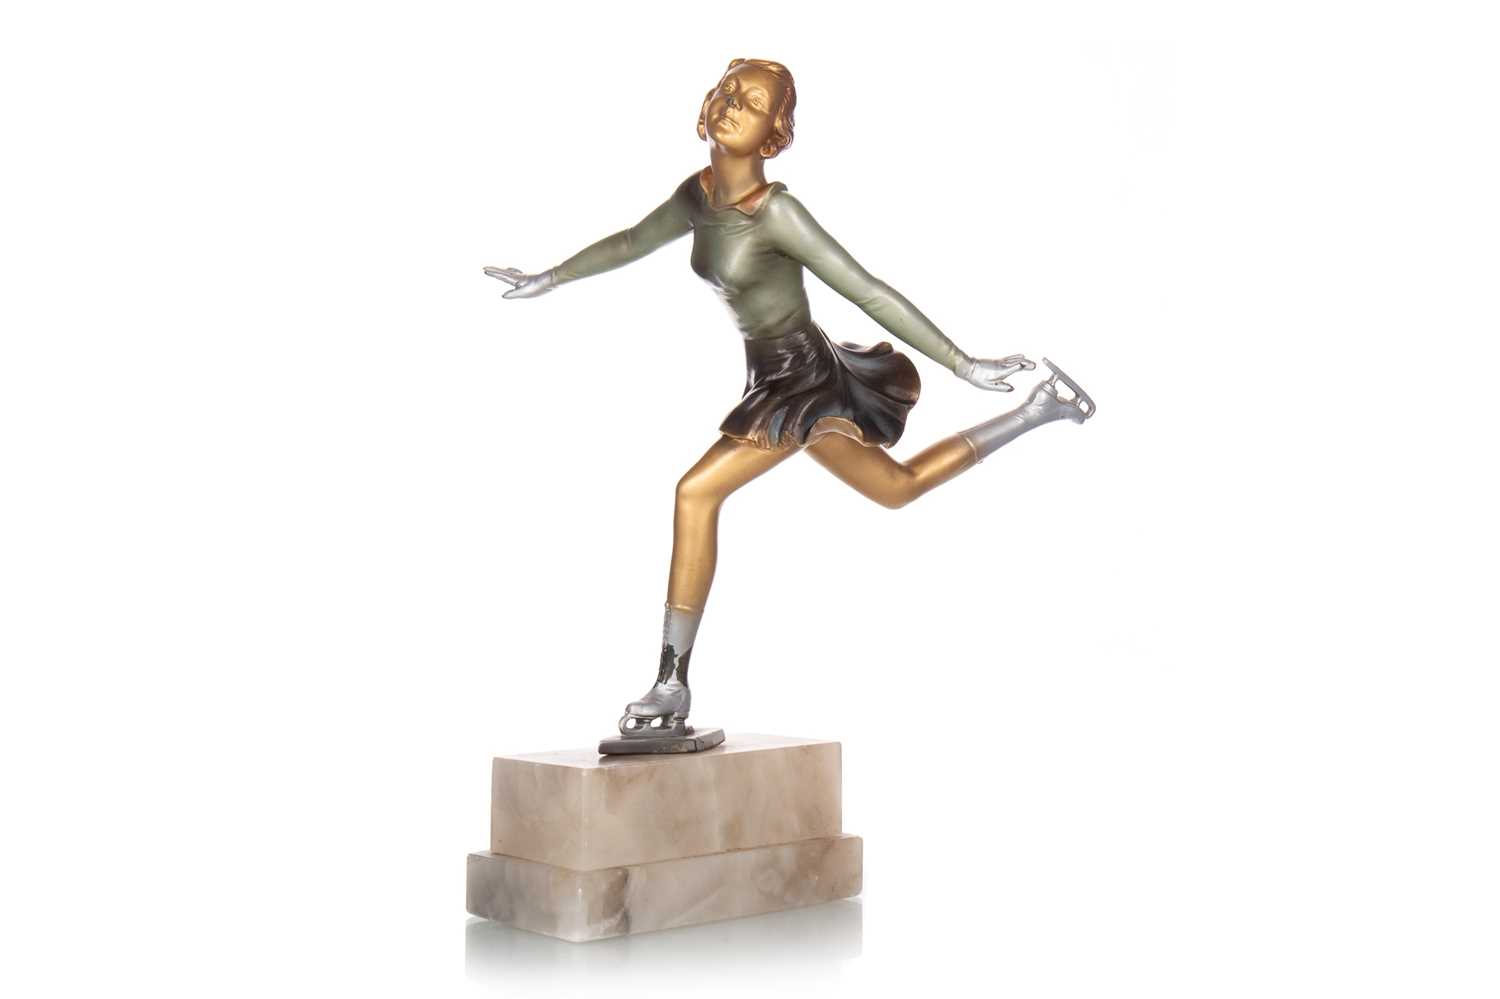 Lot 393 - IN THE MANNER OF JOSEF LORENZL, ART DECO COLD PAINTED BRONZE FIGURE OF AN ICE SKATER